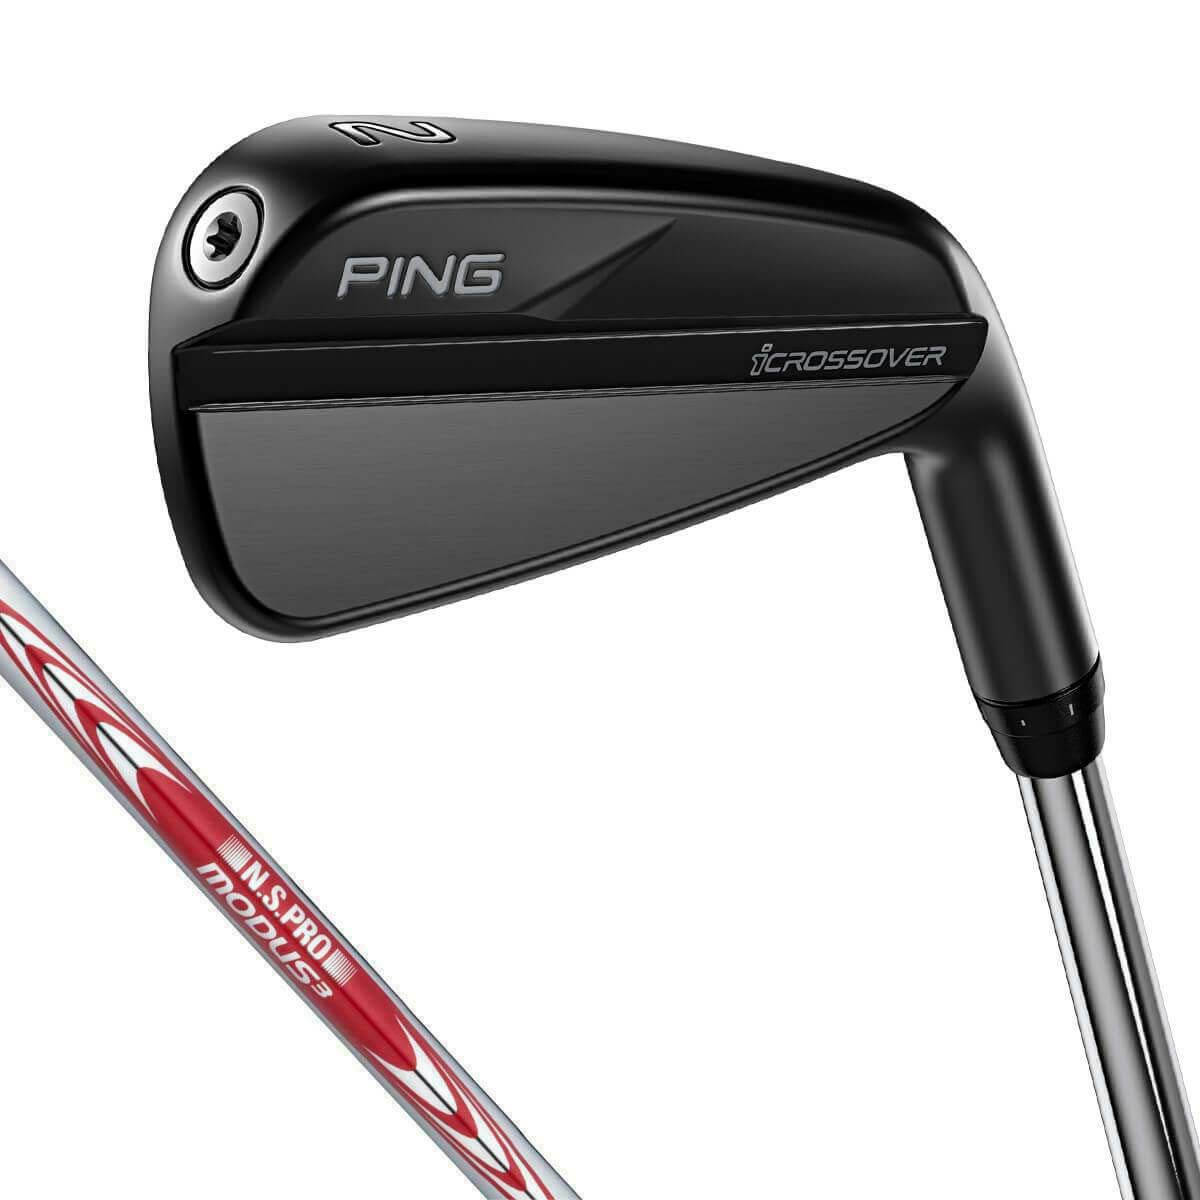 PING G425 CROSSOVER #3 レフティ